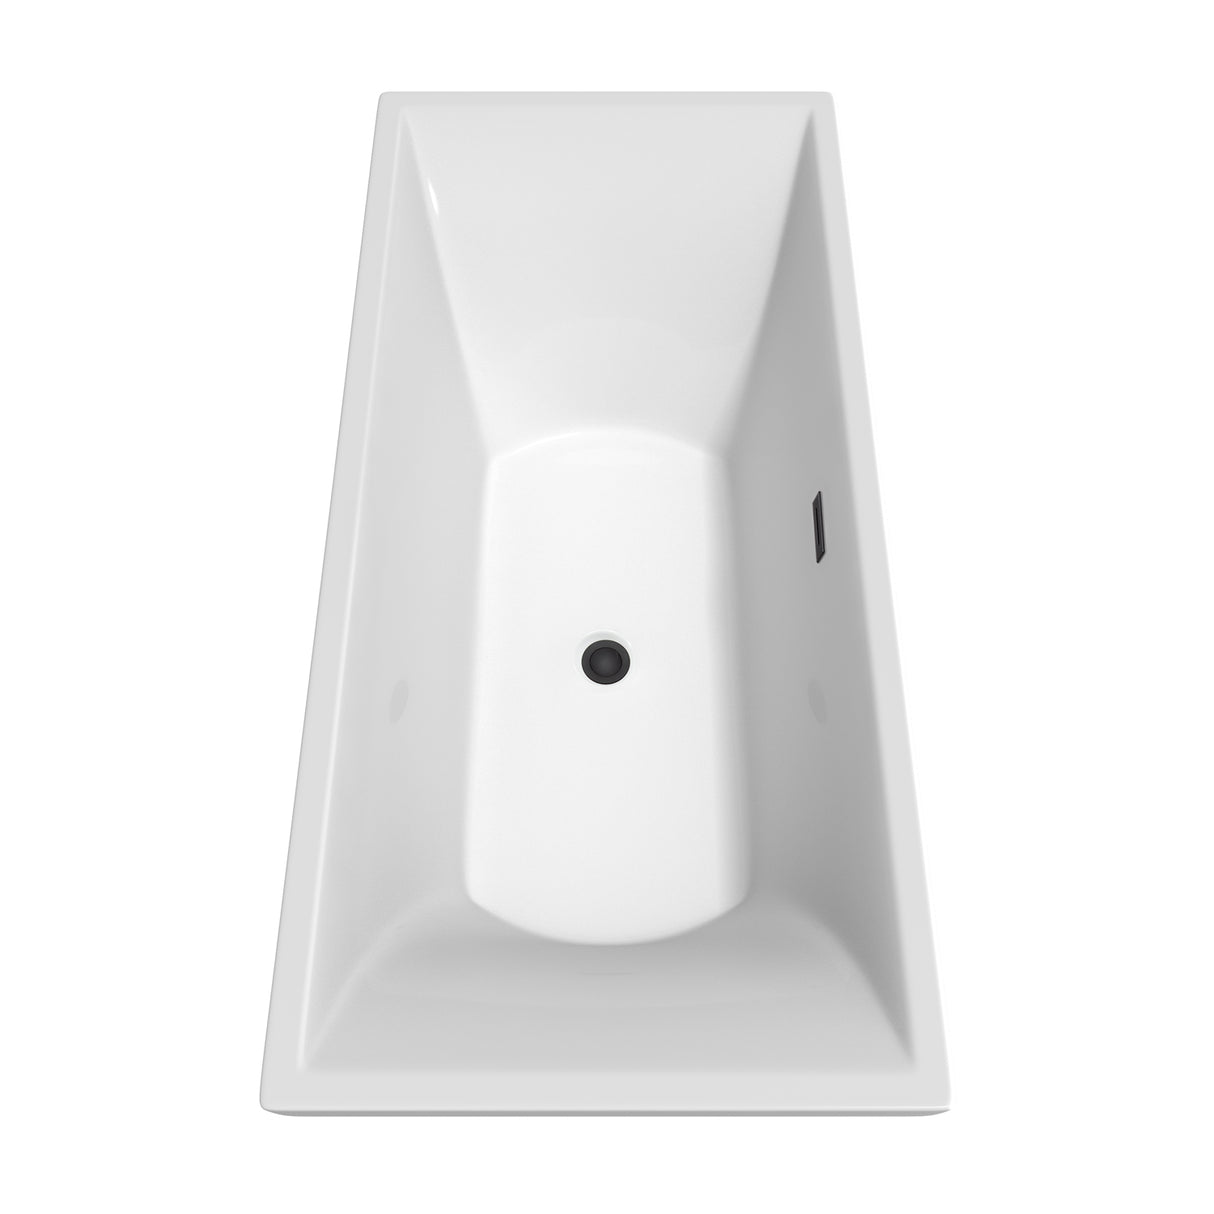 Maryam 71 Inch Freestanding Bathtub in White with Matte Black Drain and Overflow Trim